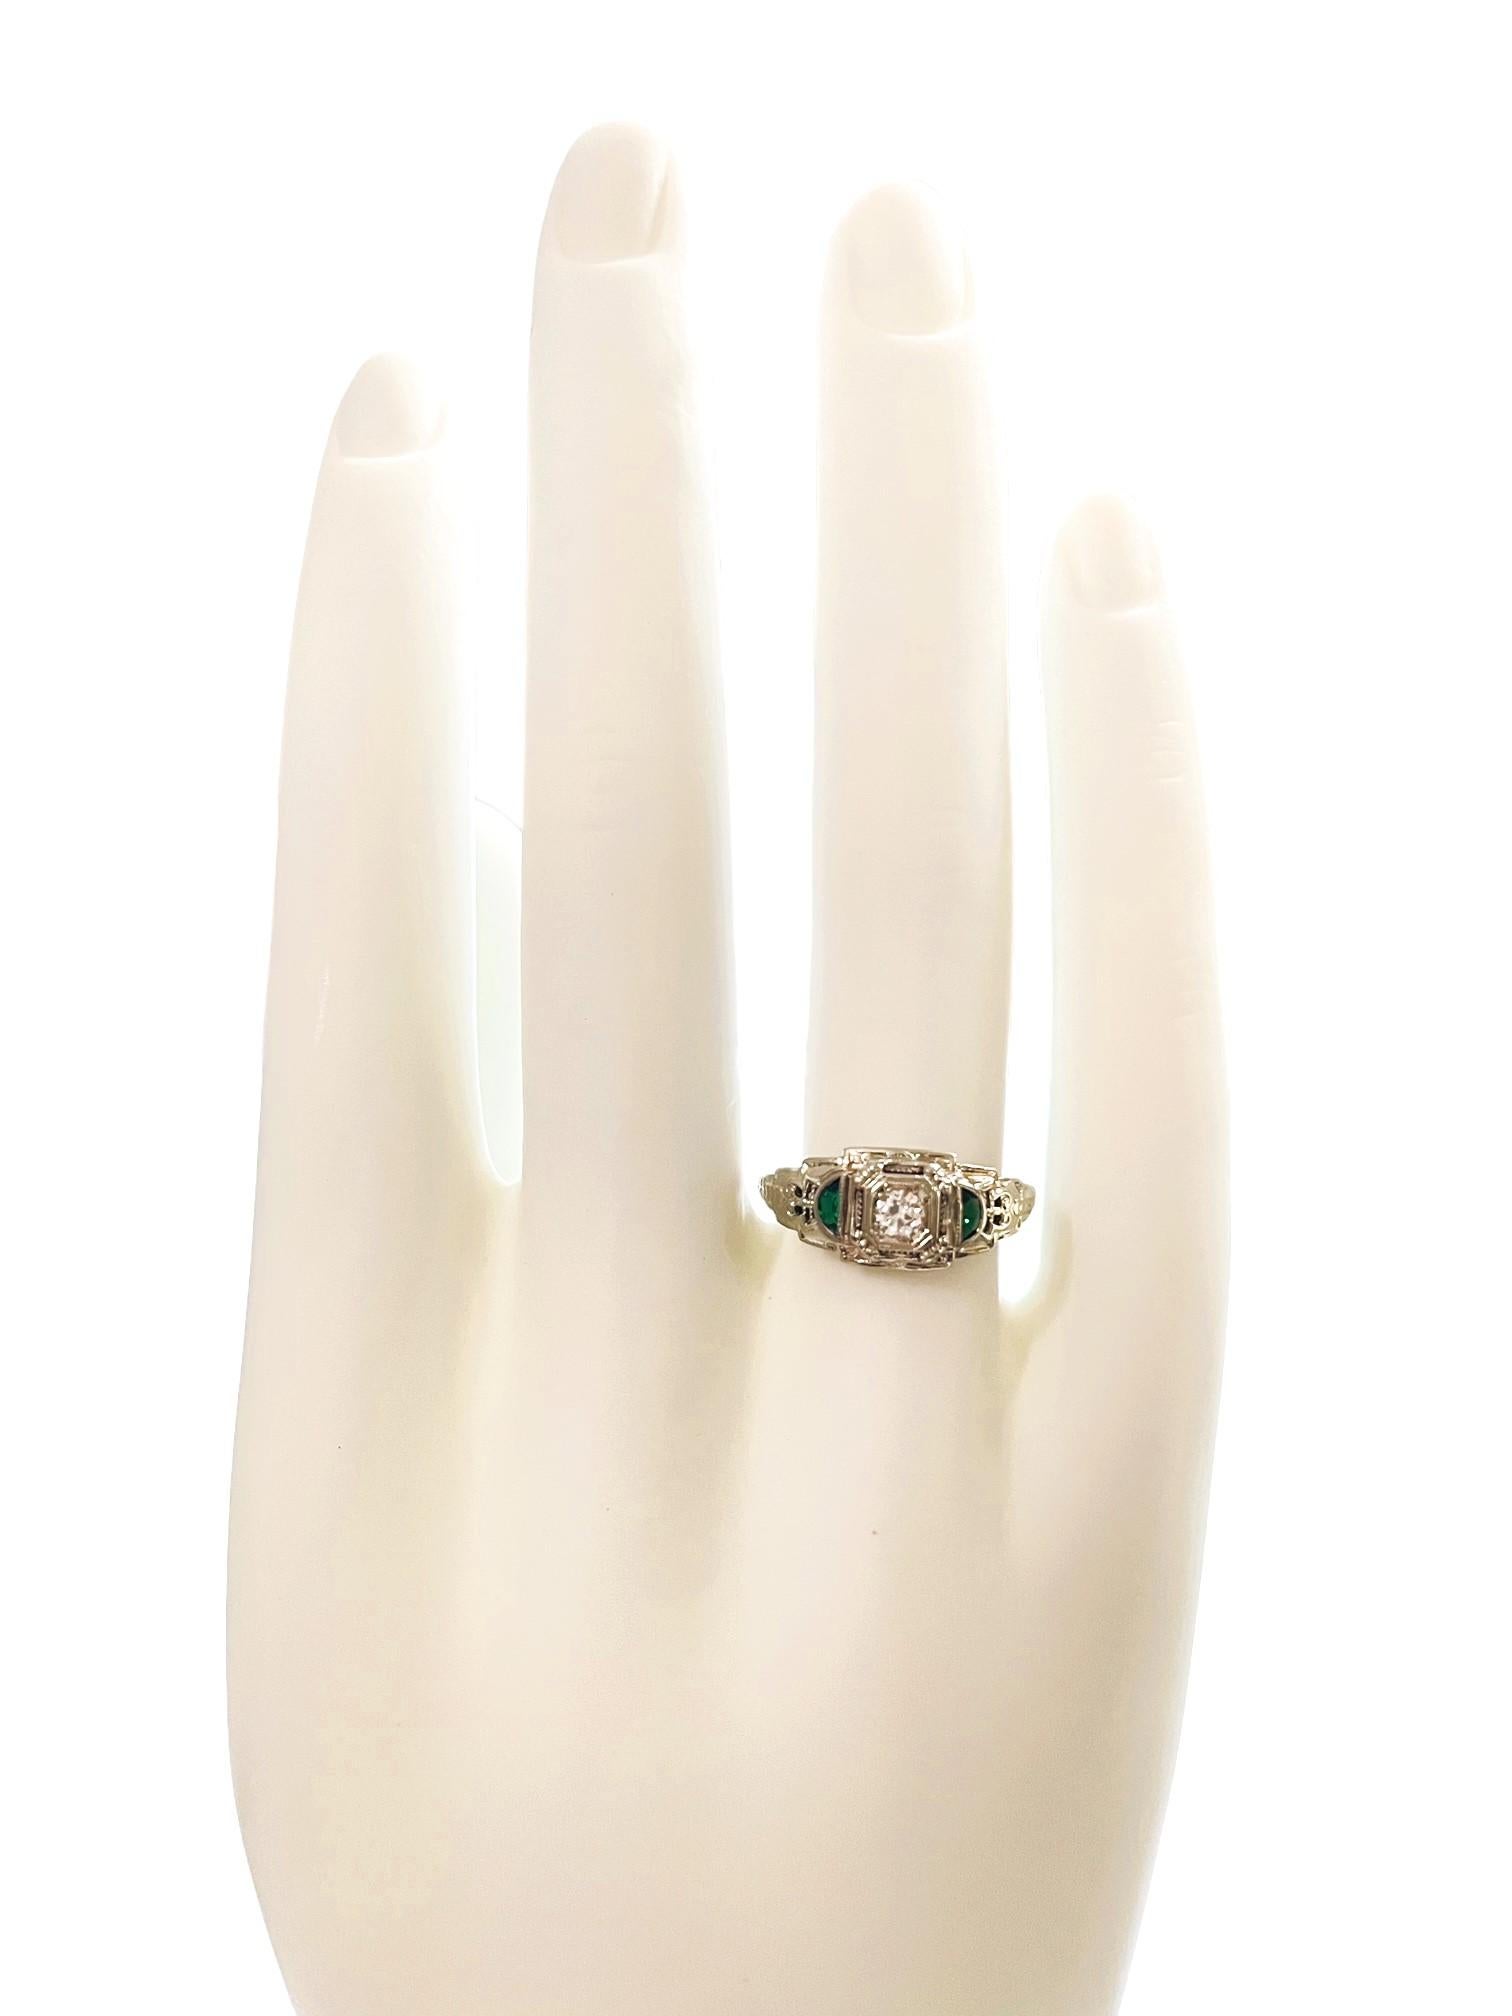 Vintage 18K White Gold Diamond and Emerald Ring with Appraisal 6